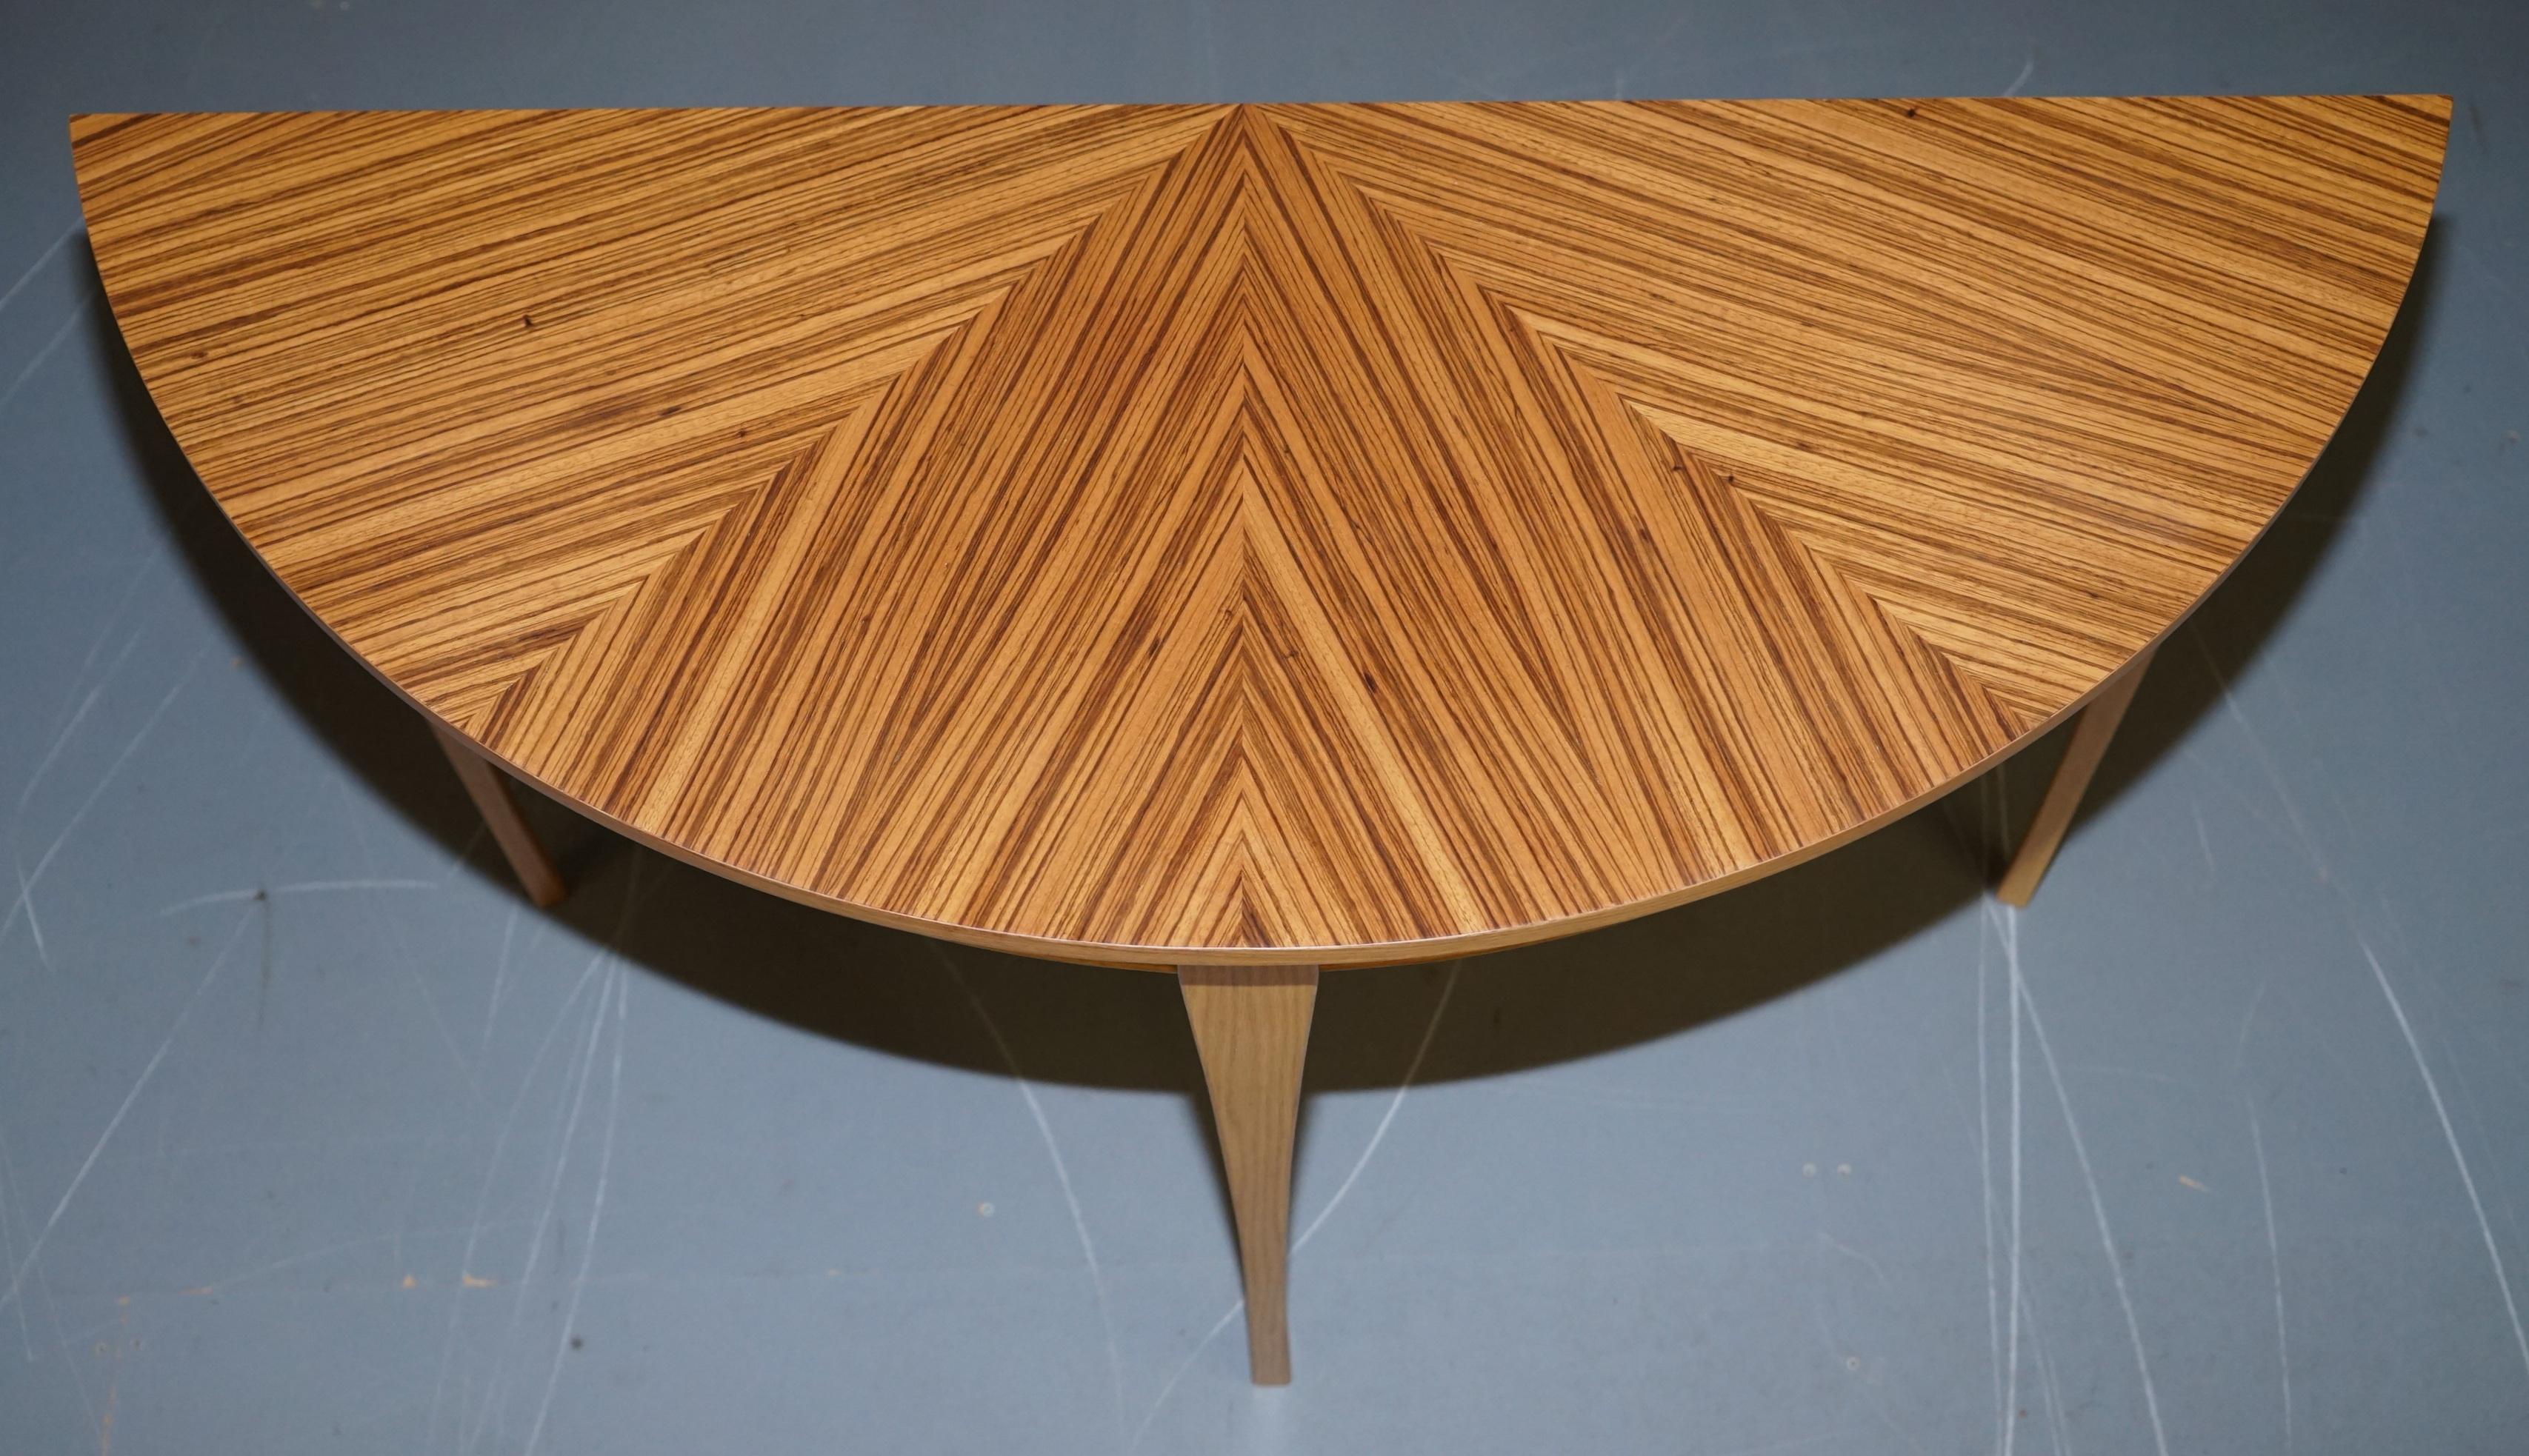 Hand-Crafted X2 Lovely Bevan Funnell Phoenix Zebrano Wood Demilune Console Tables For Sale